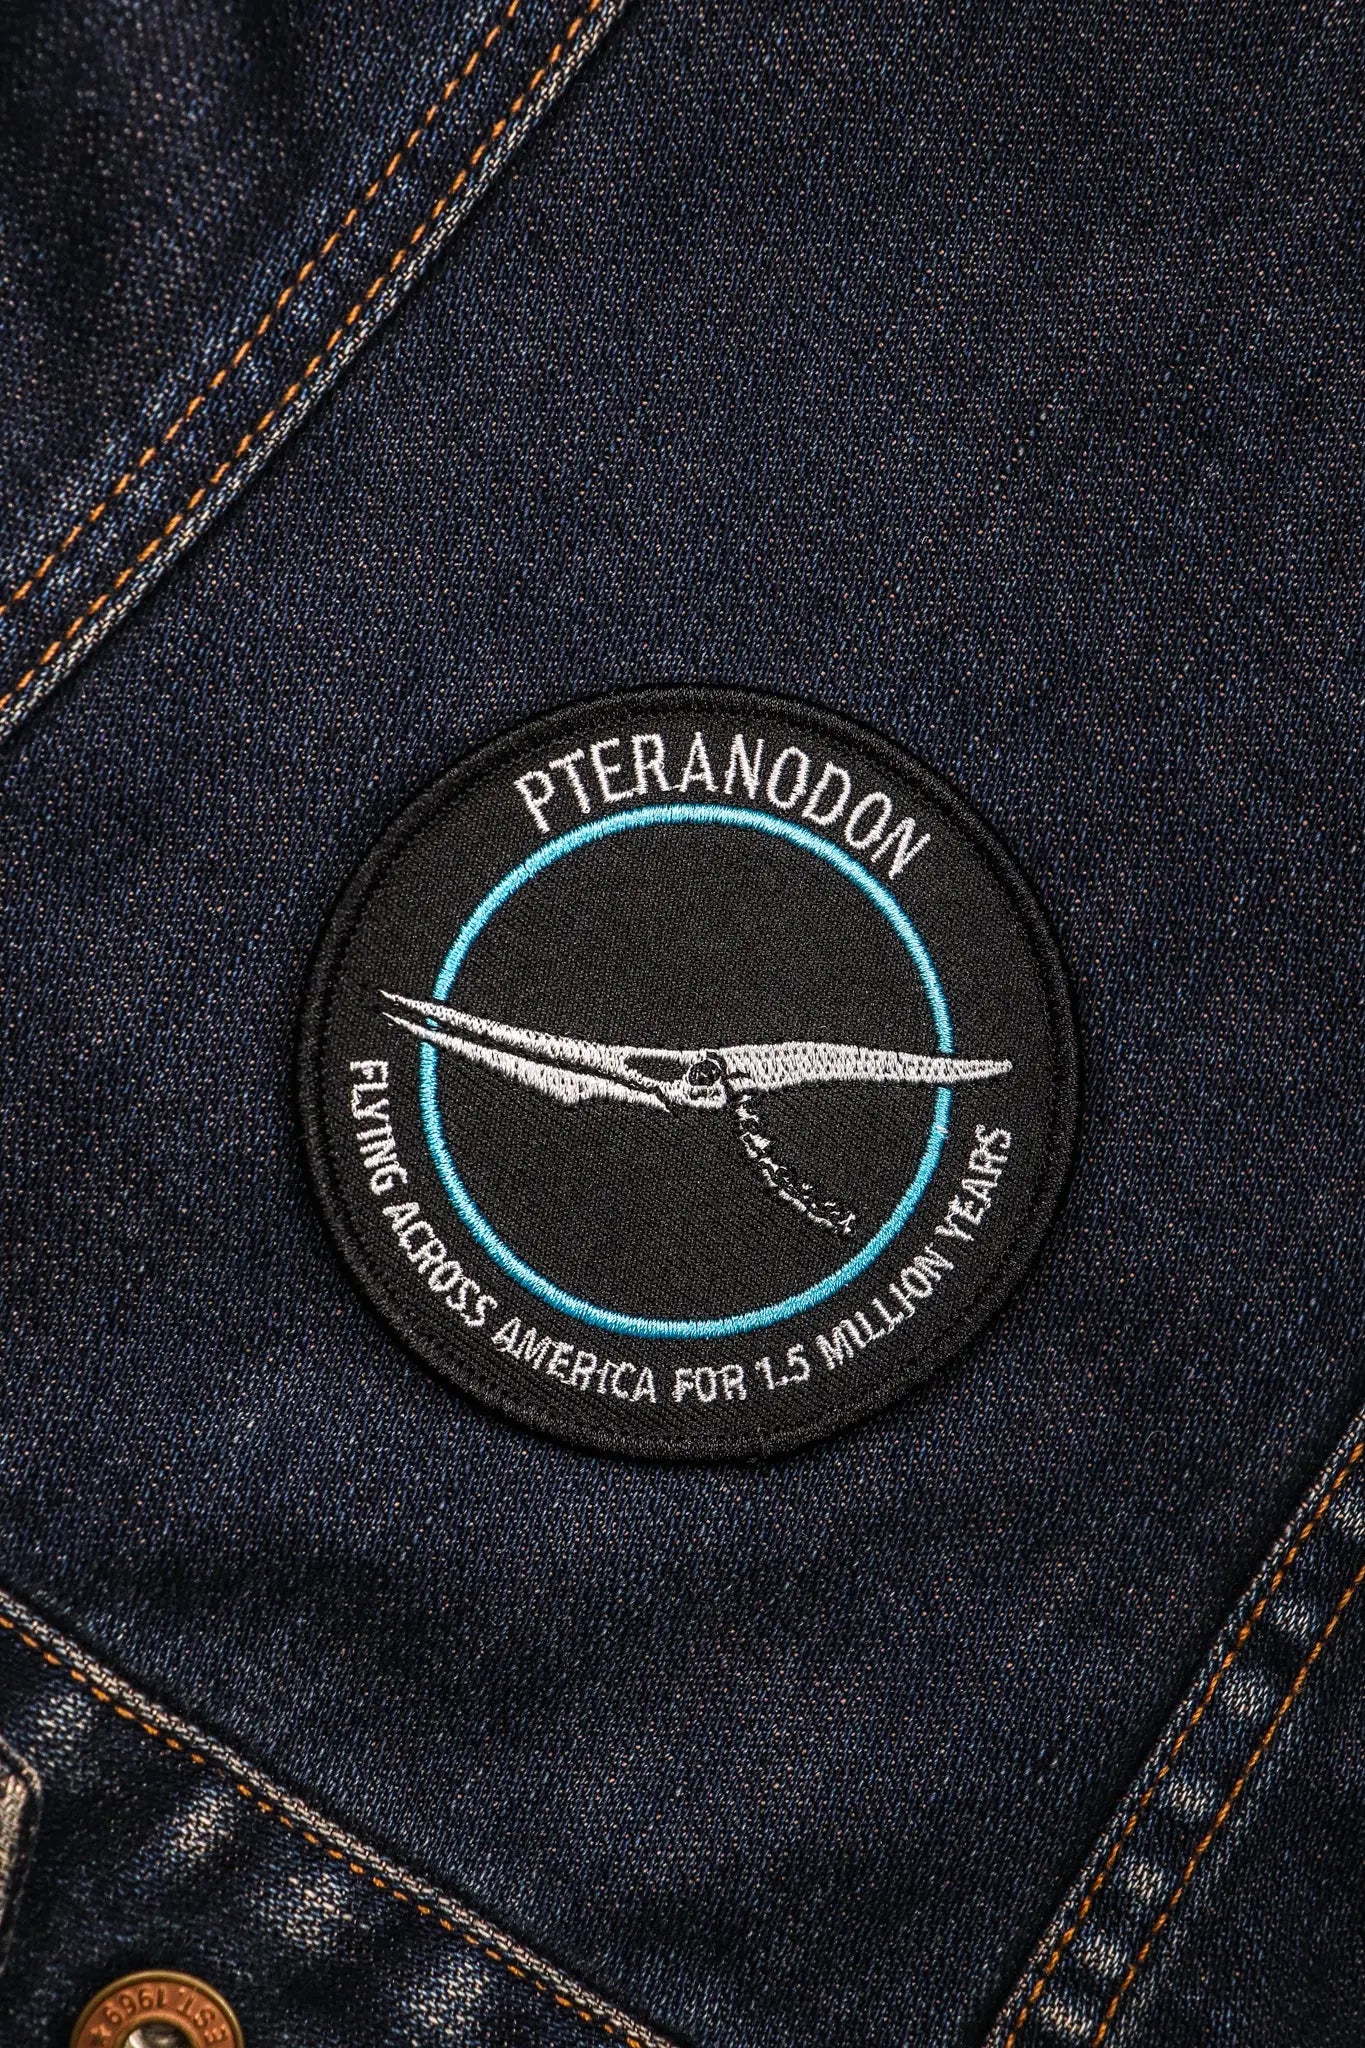 Pteranodon Patch - Stemcell Science Shop